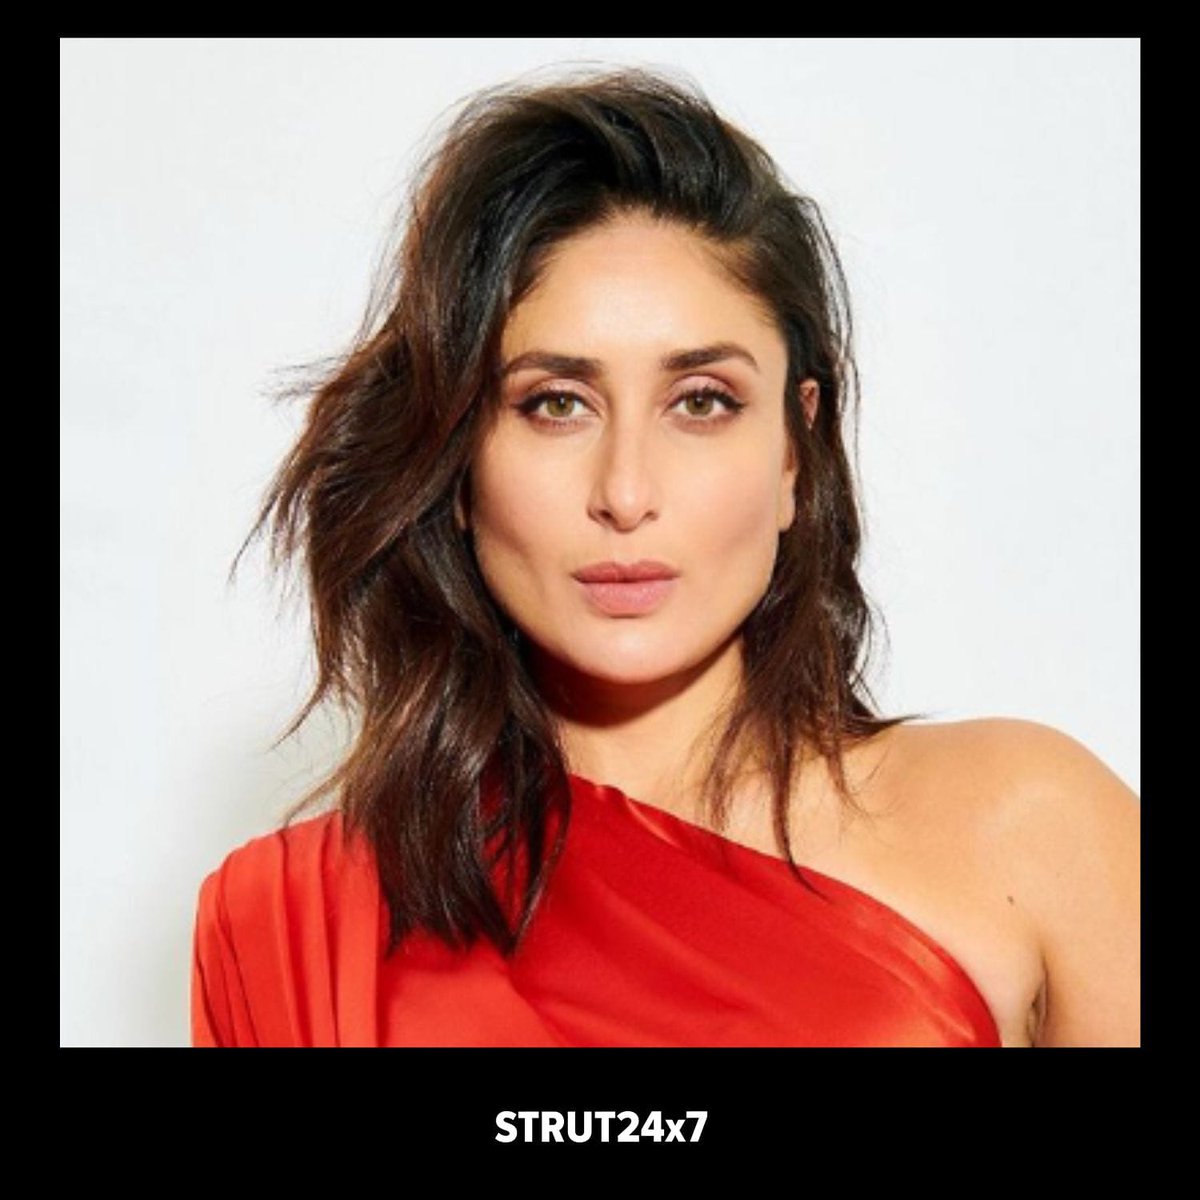 Messy hair just don’t care with this one AmitThakur26 for #KareenaKapoorKhan
The textured waves are love love love🖤

#MessyHairDontCare #ShortHair #Strut24x7  - Team FirstBuzz #RealFirstBuzz #FirstBuzz #Bollywood #Actress